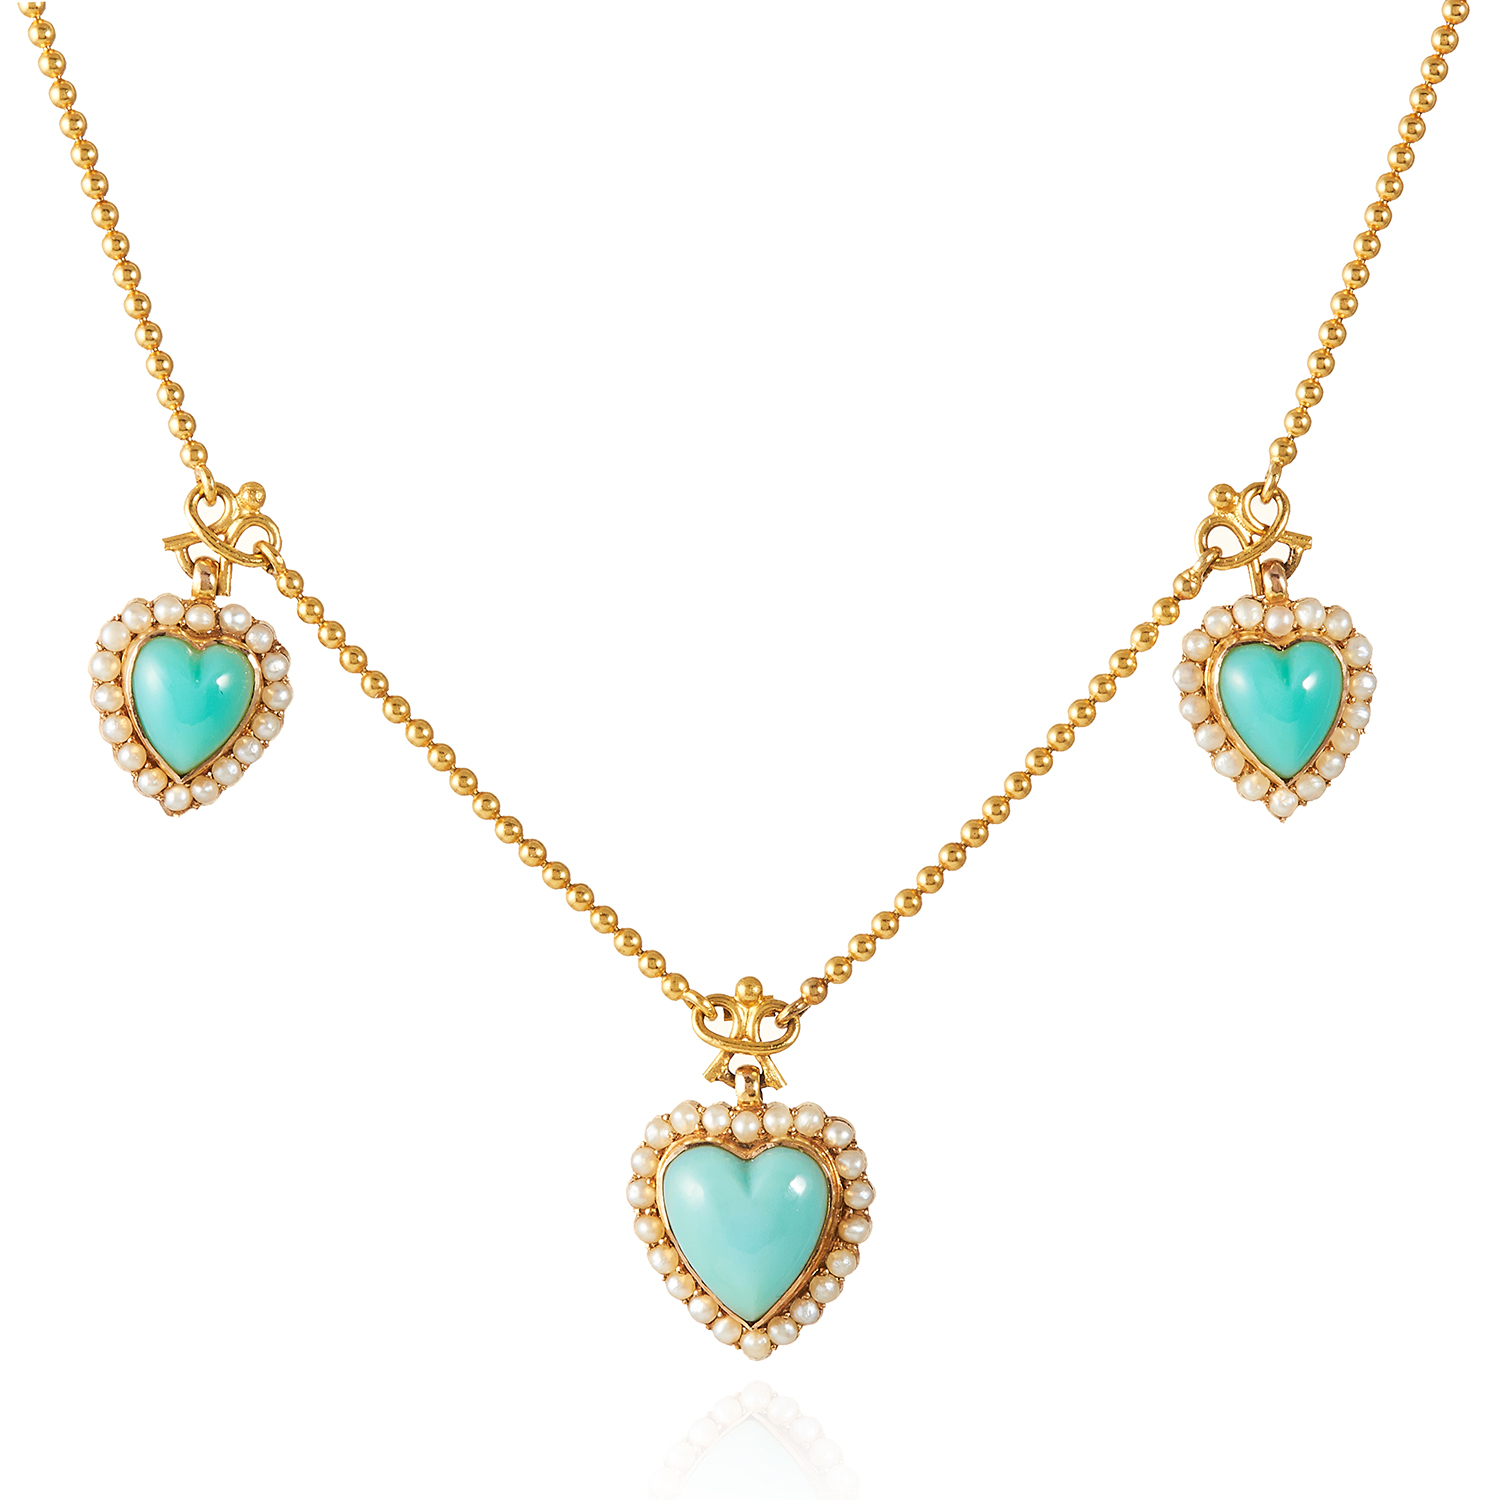 AN ANTIQUE TURQUOISE AND PEARL NECKLACE in yellow gold, the fancy beaded chain suspending a trio